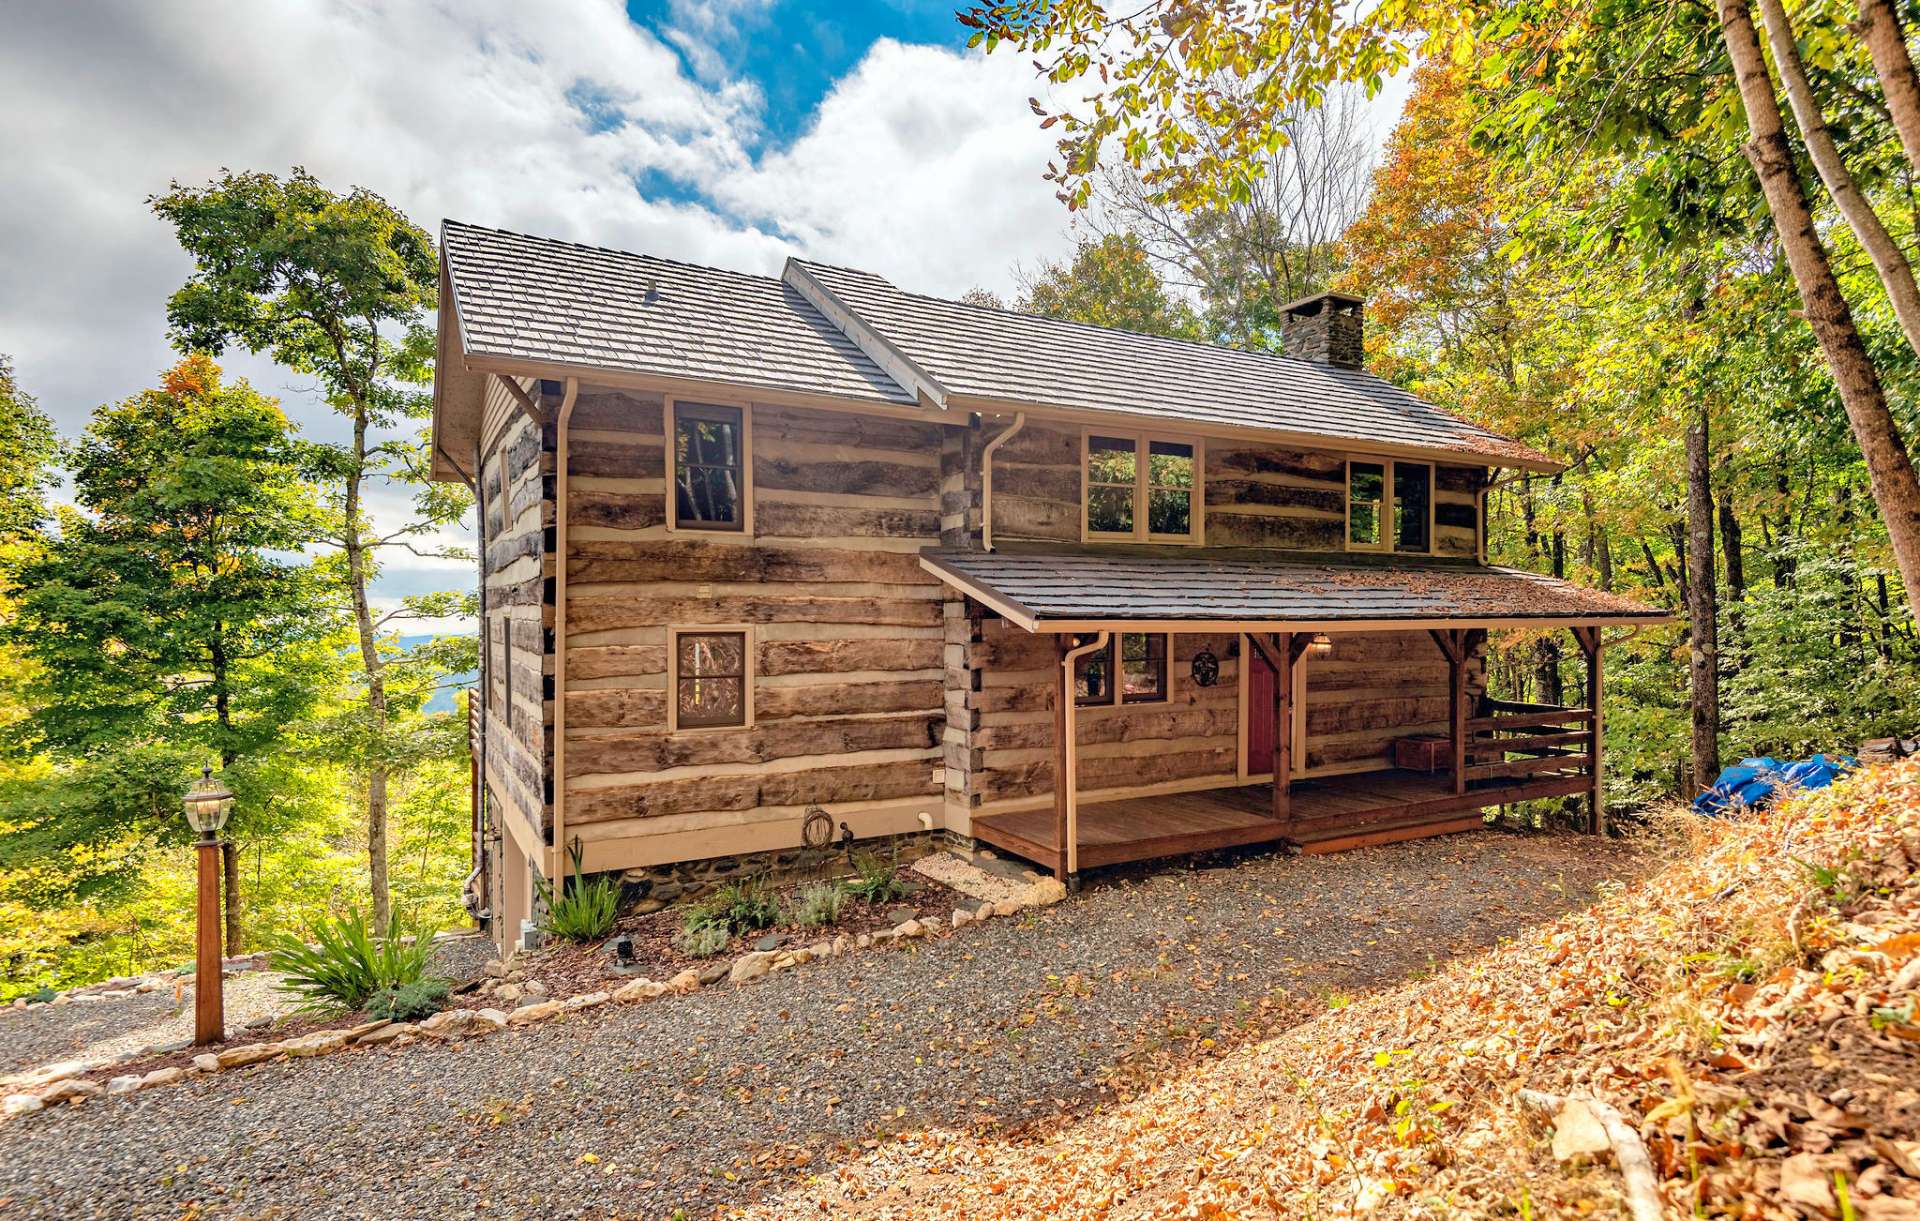 This hearty Mountain Beauty was built with colossal logs.